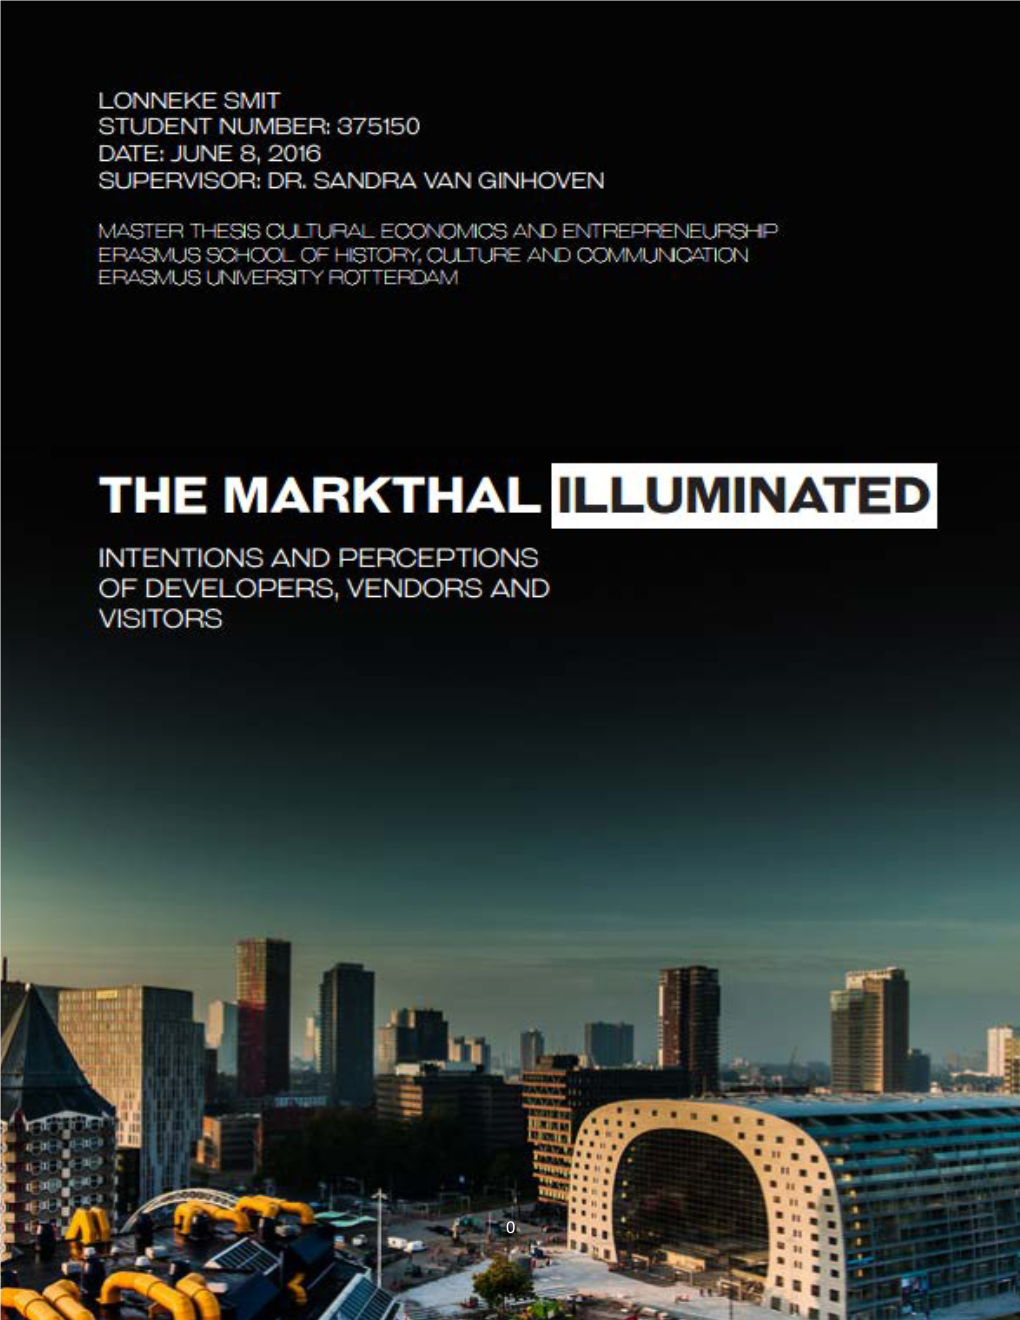 The Markthal Illuminated Intentions and Perceptions of Developers, Vendors and Visitors